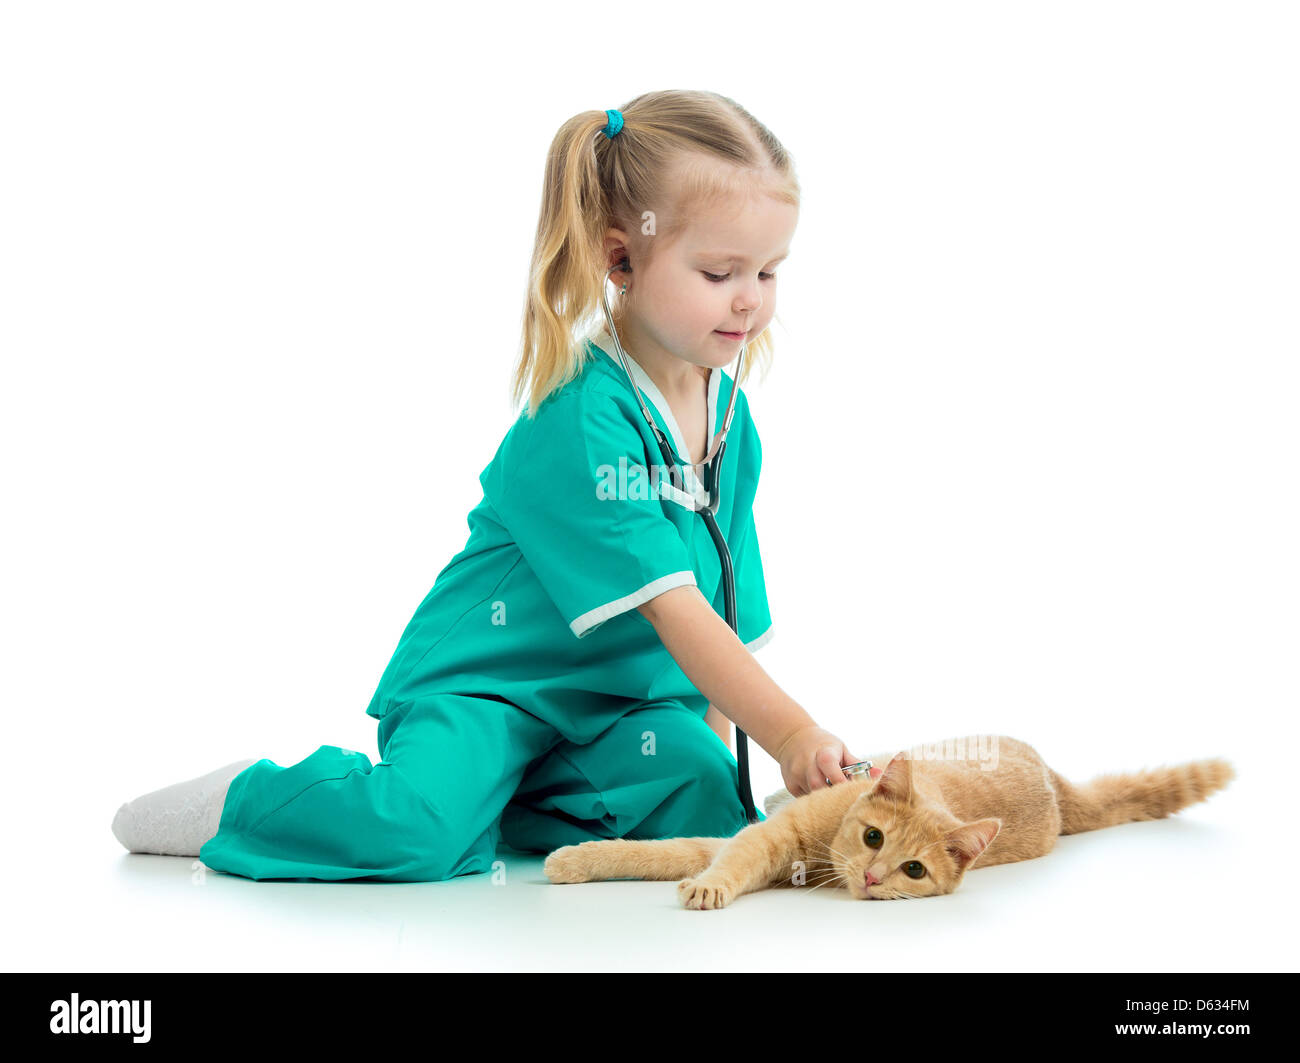 Cute kid girl playing doctor avec cat isolated Banque D'Images